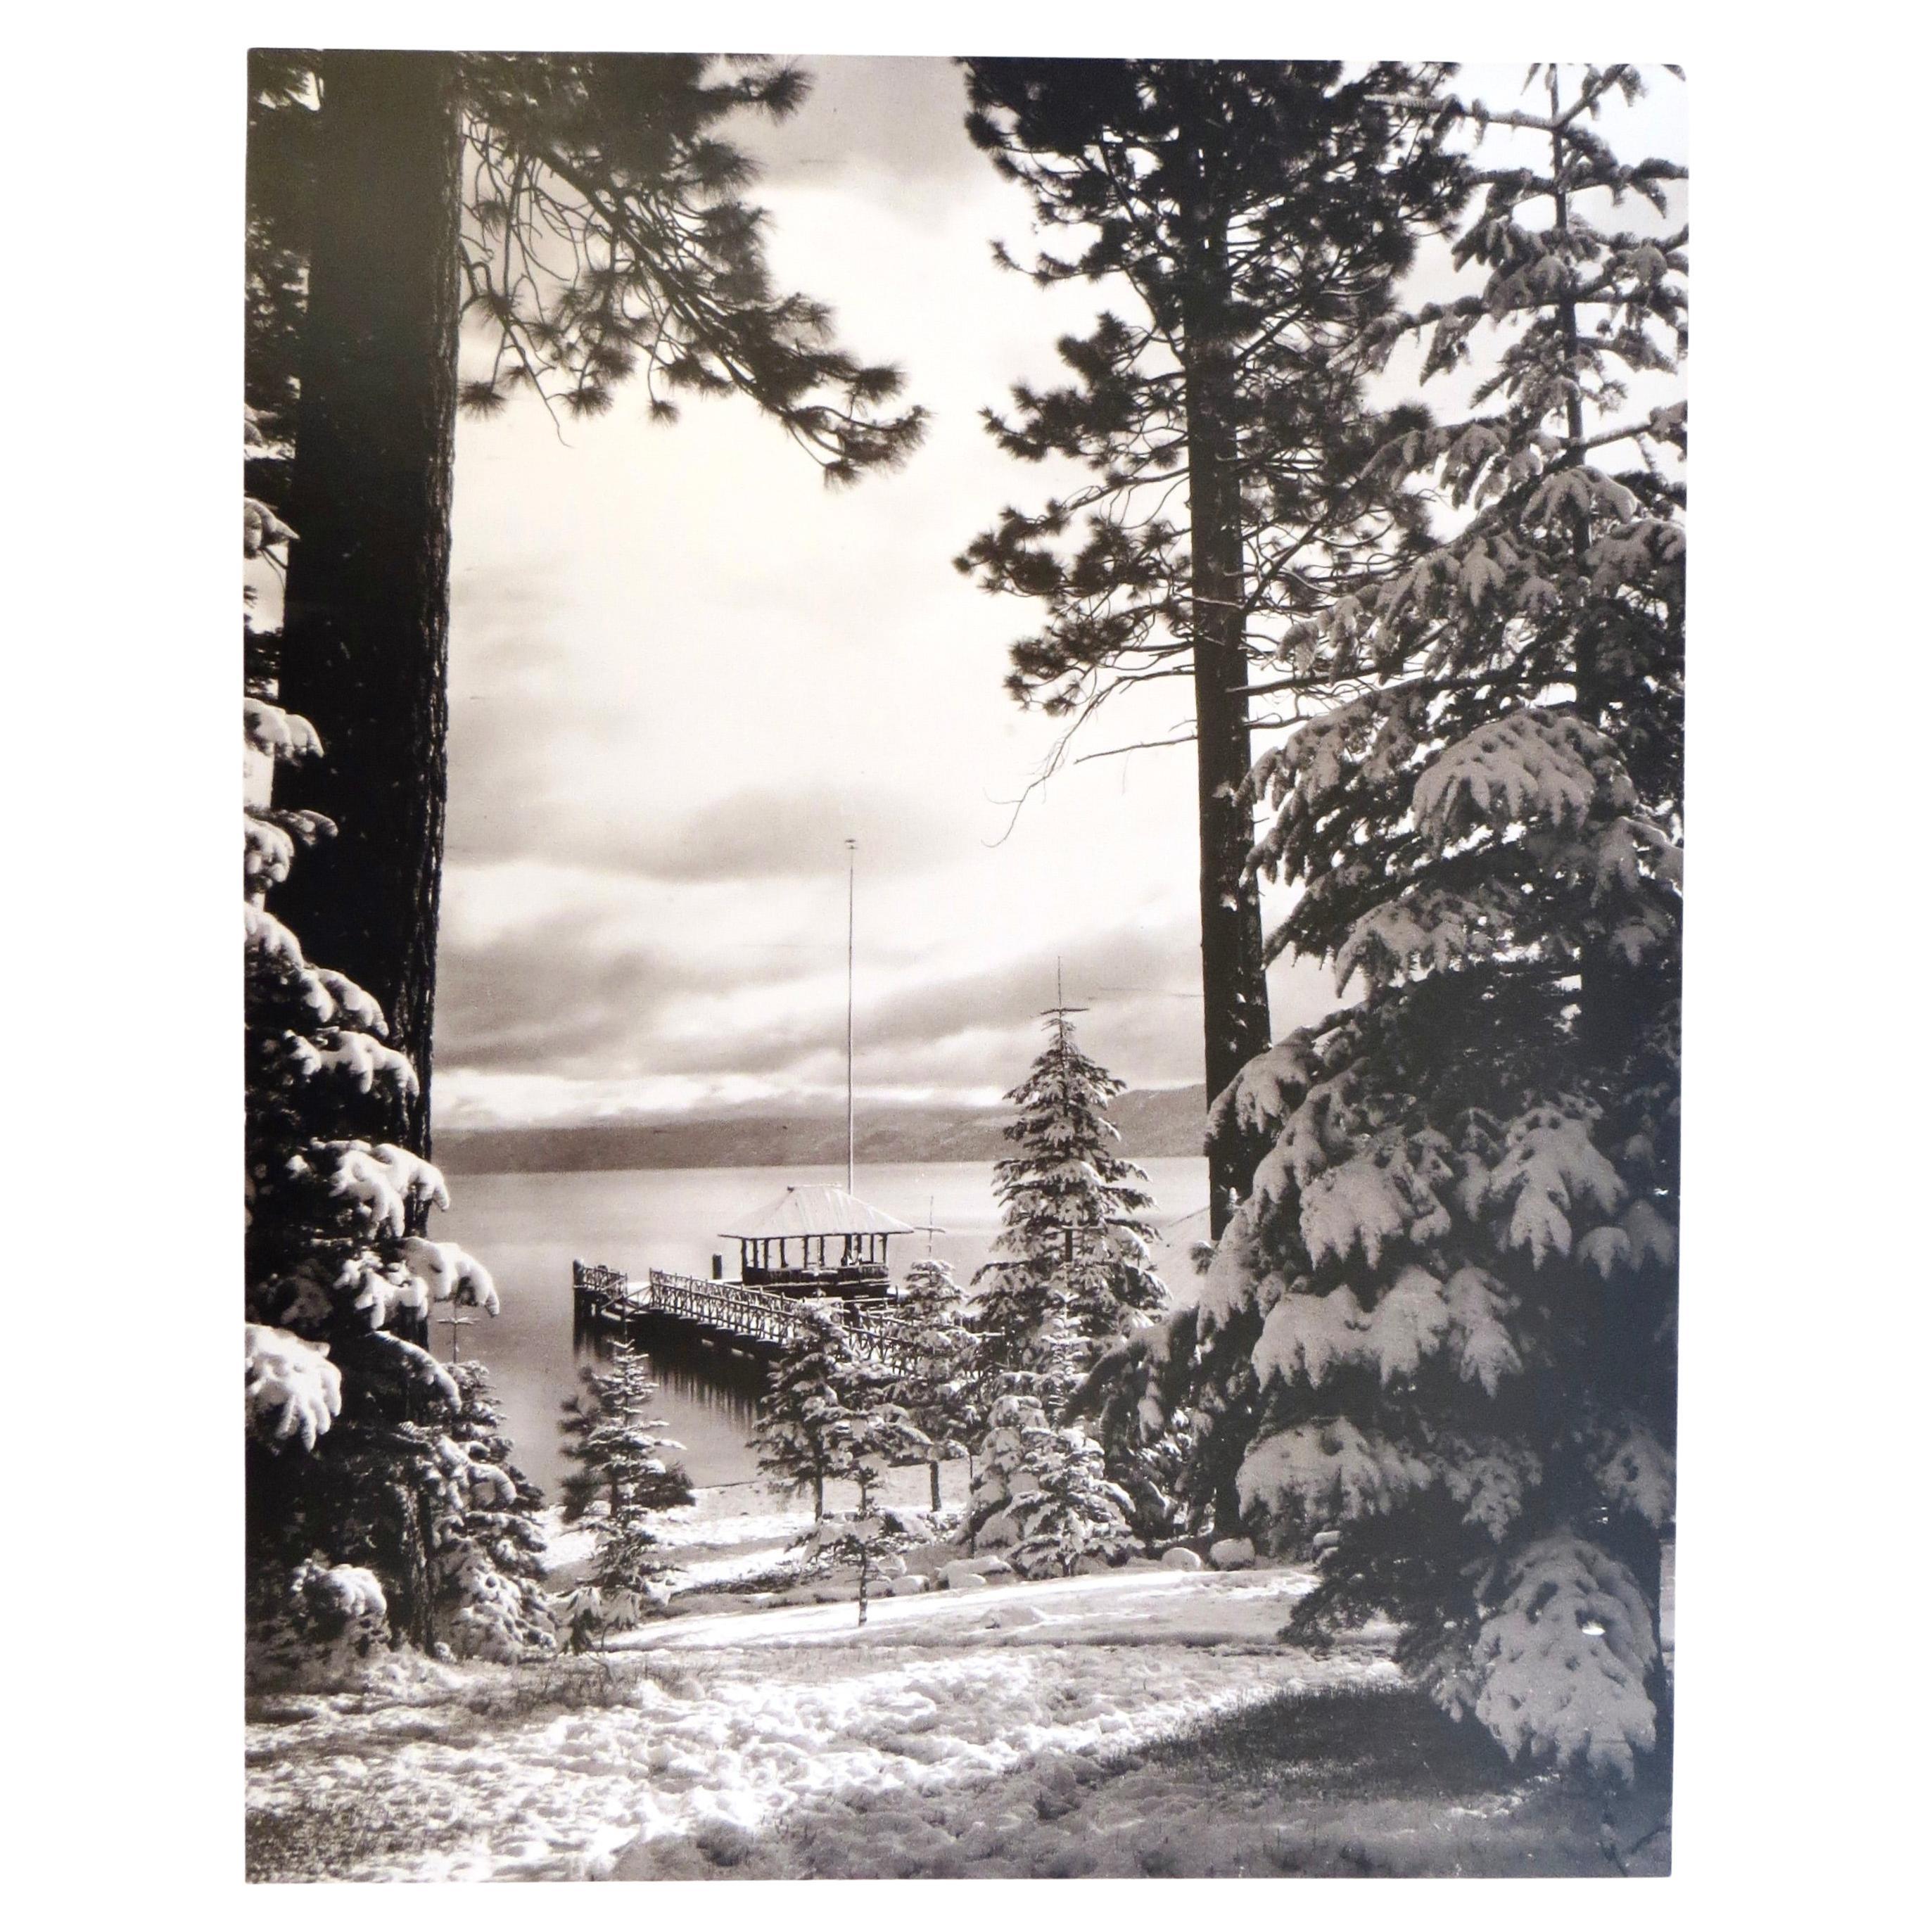 Original Vintage Photo of "Lake Tahoe with Snow and Trees" American, Dated 1905